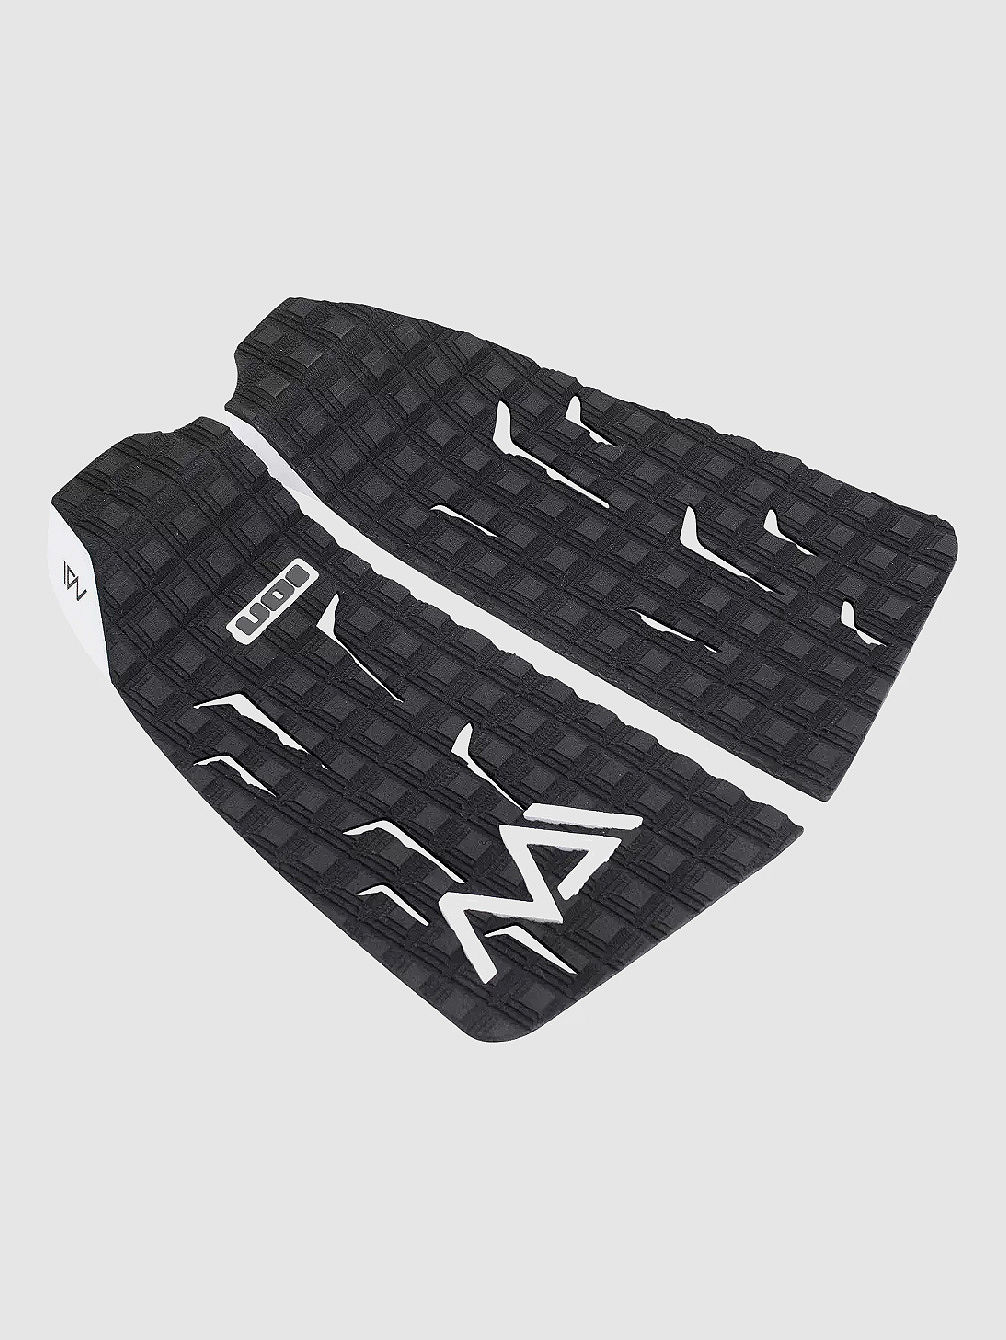 Maiden (2Pcs) Traction Tail Pad